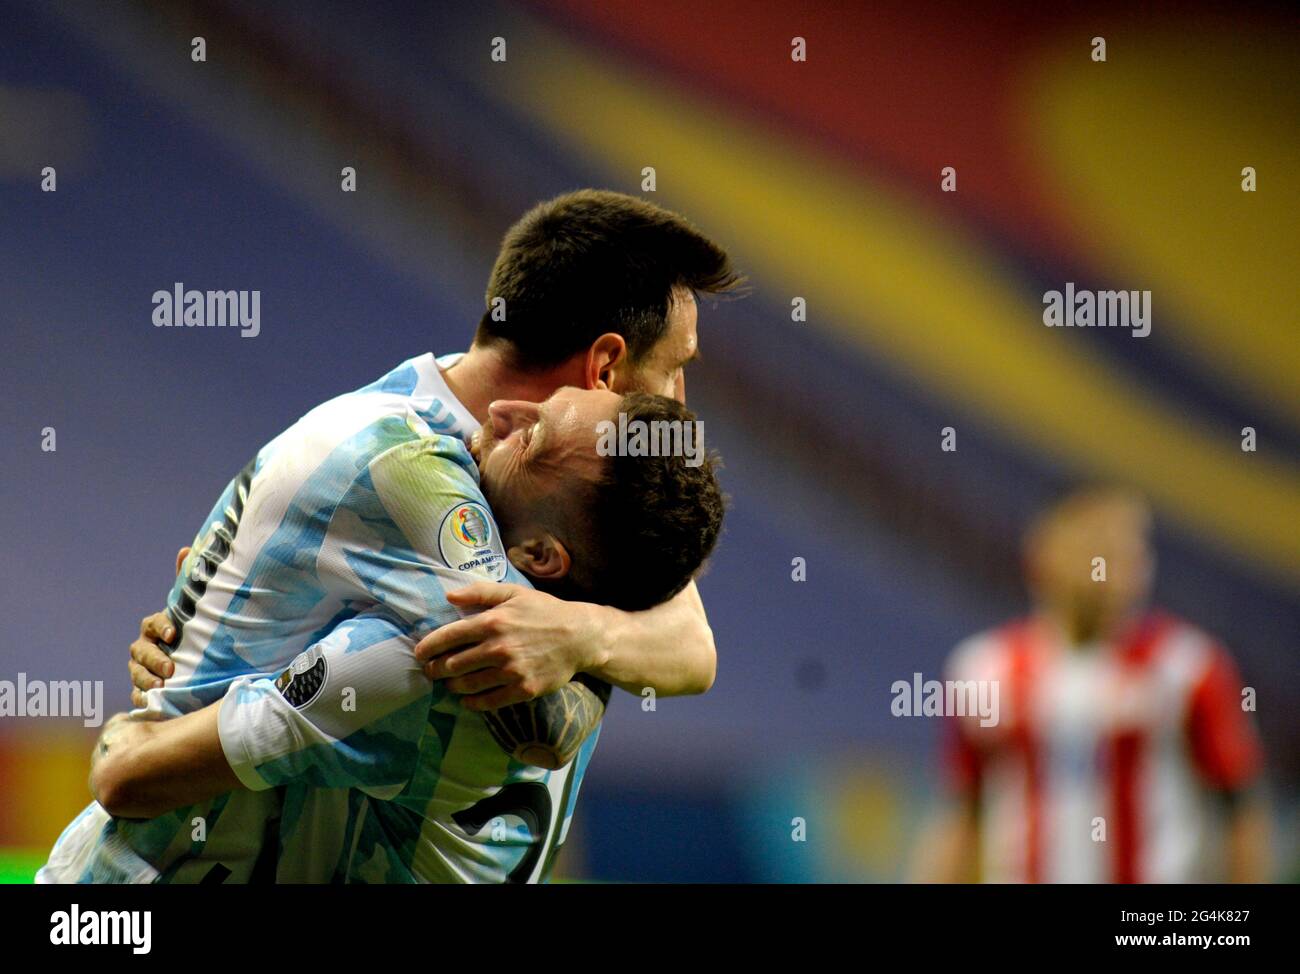 BRASILIA, BRAZIL - JUNE 21: Alejandro Papu Gomez of Argentina celebrates with his team mates Lionel Messi after scores his gol ,during the match between Argentina and Paraguay at Mane Garrincha Stadium on June 21, 2021 in Brasilia, Brazil. (MB Media) Stock Photo